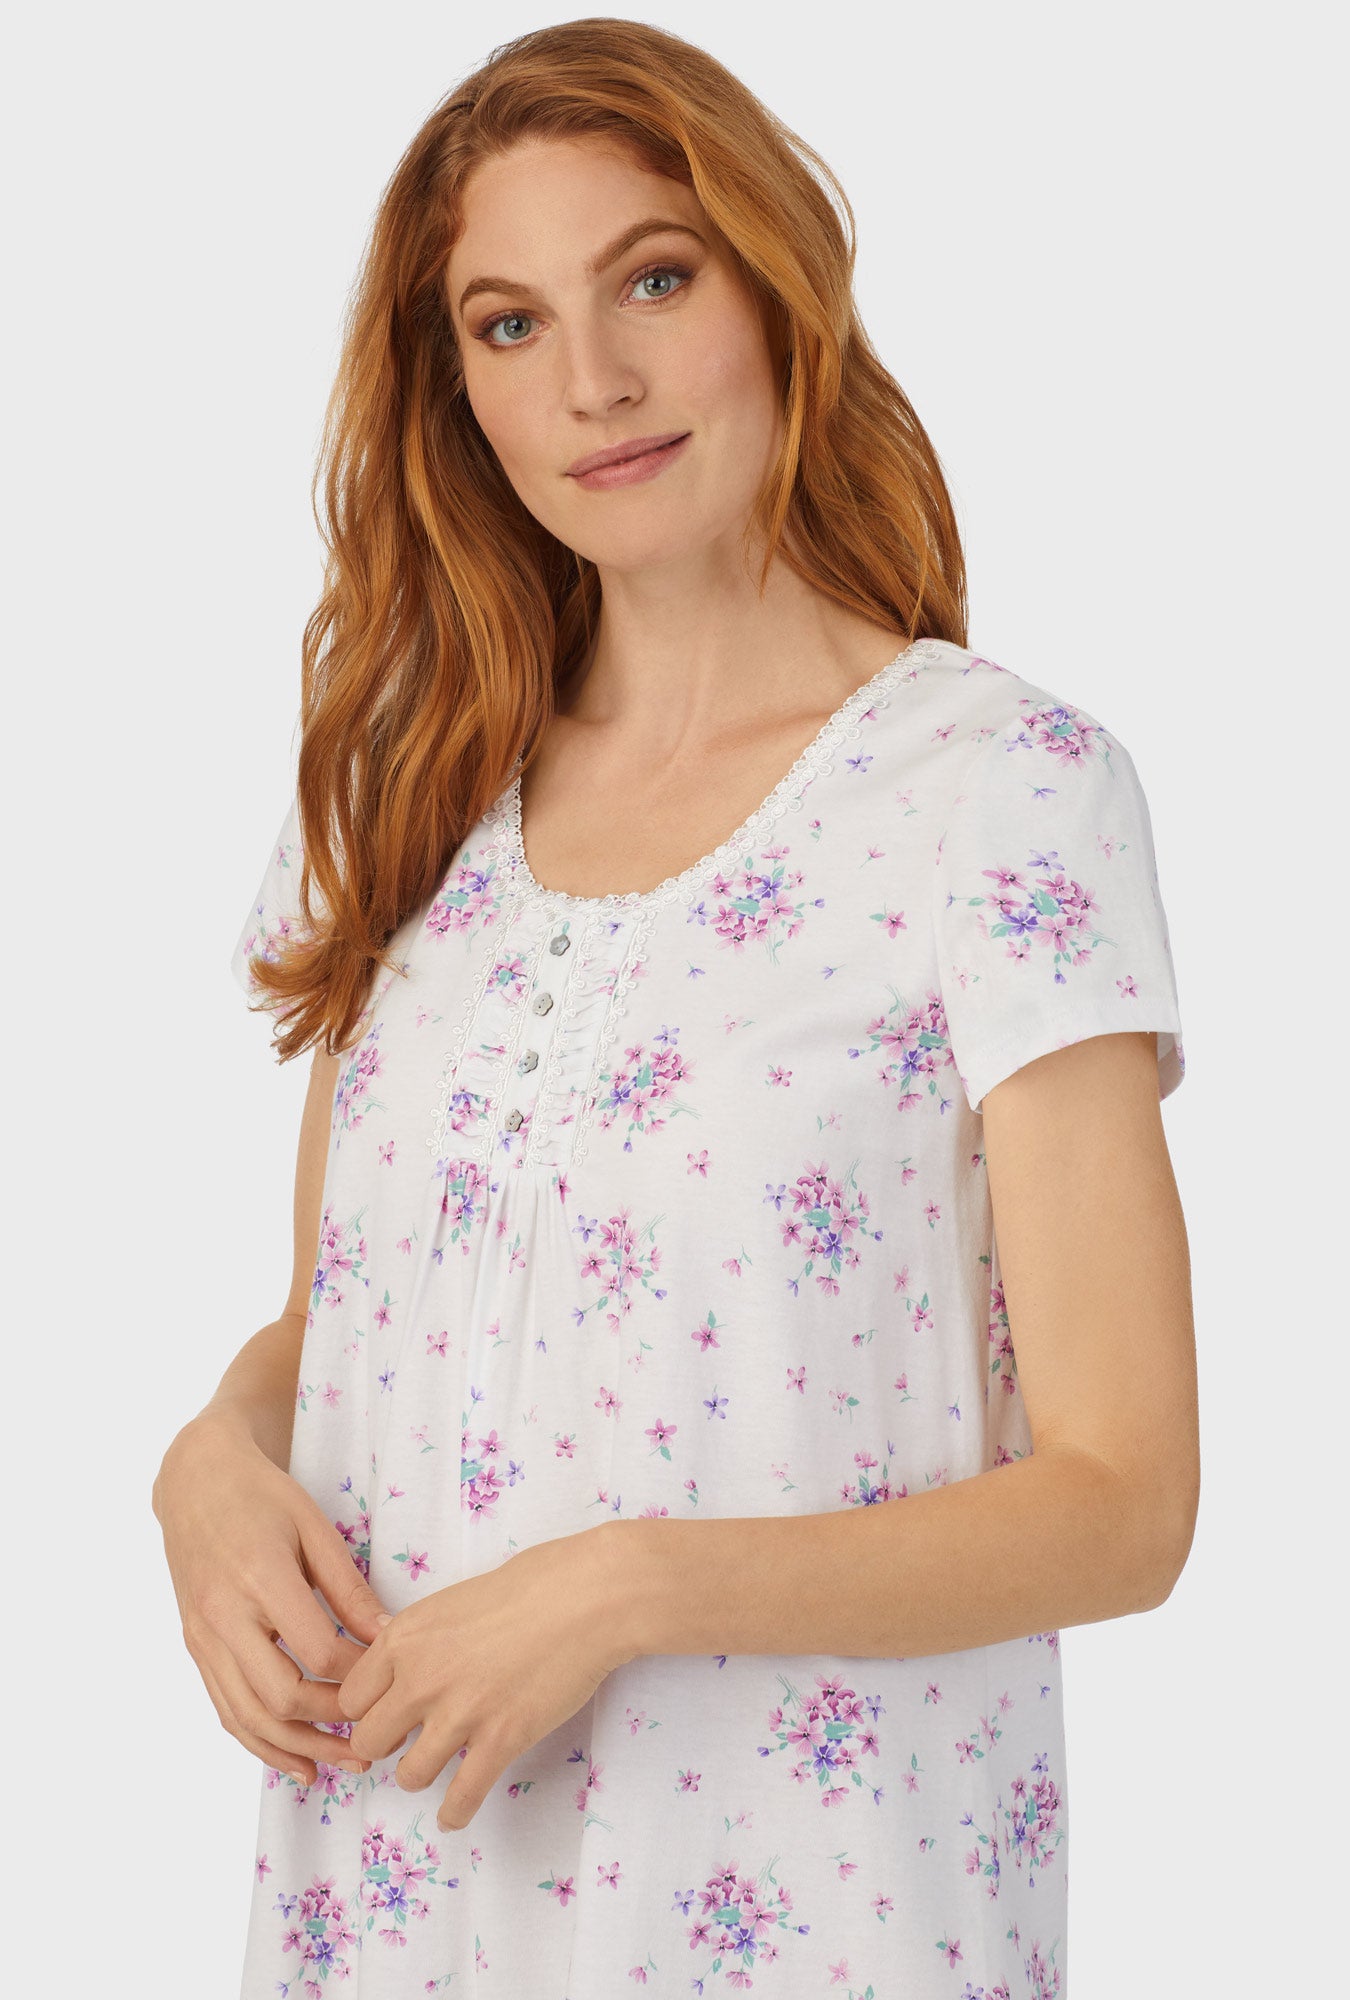 A lady wearing white cap sleeve nightshirt  with mulberry purple floral print bouquet.